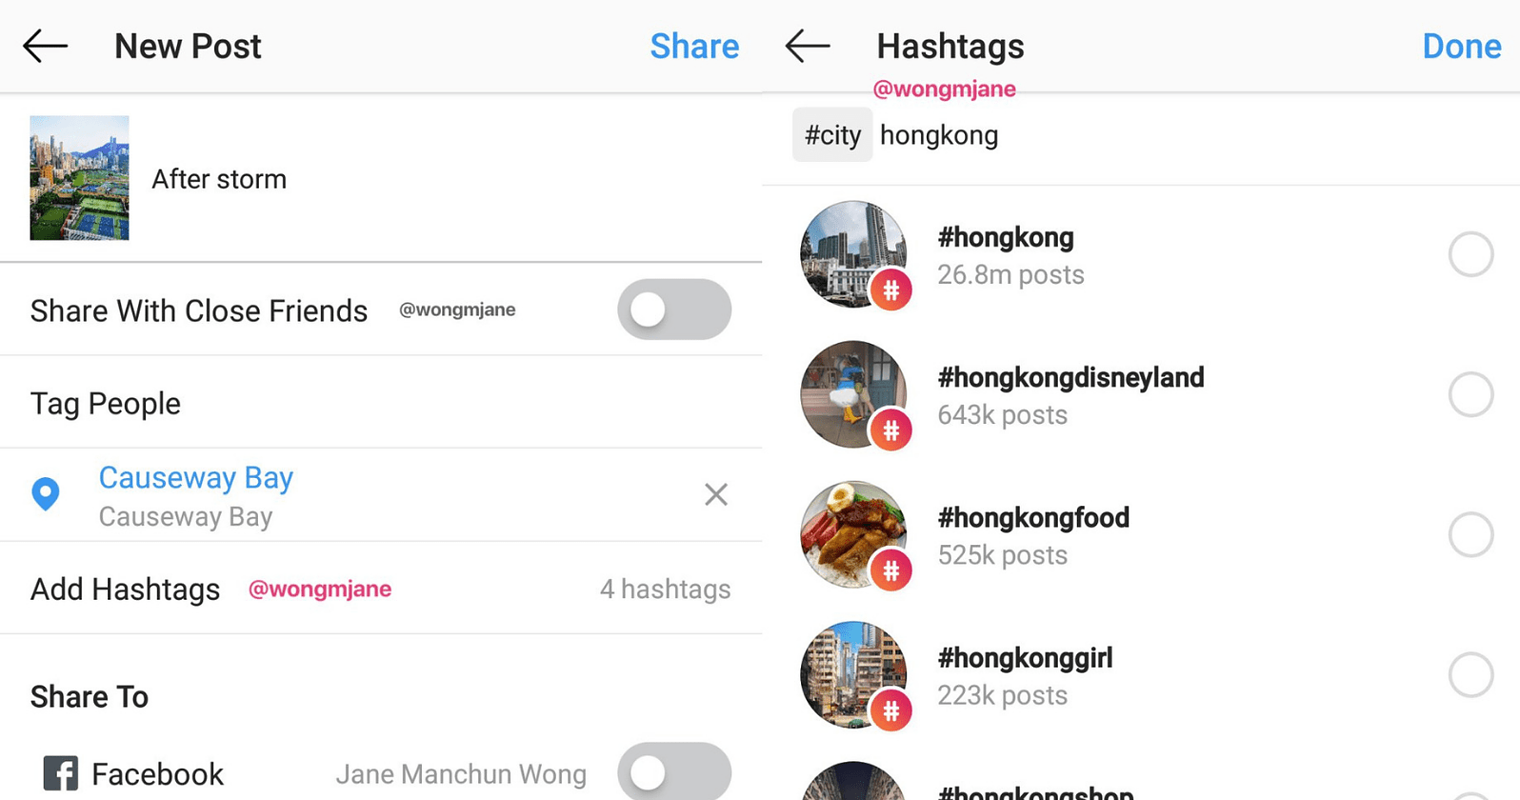 Instagram is Testing a Way to Add Hashtags to Posts Without Putting Them in Captions